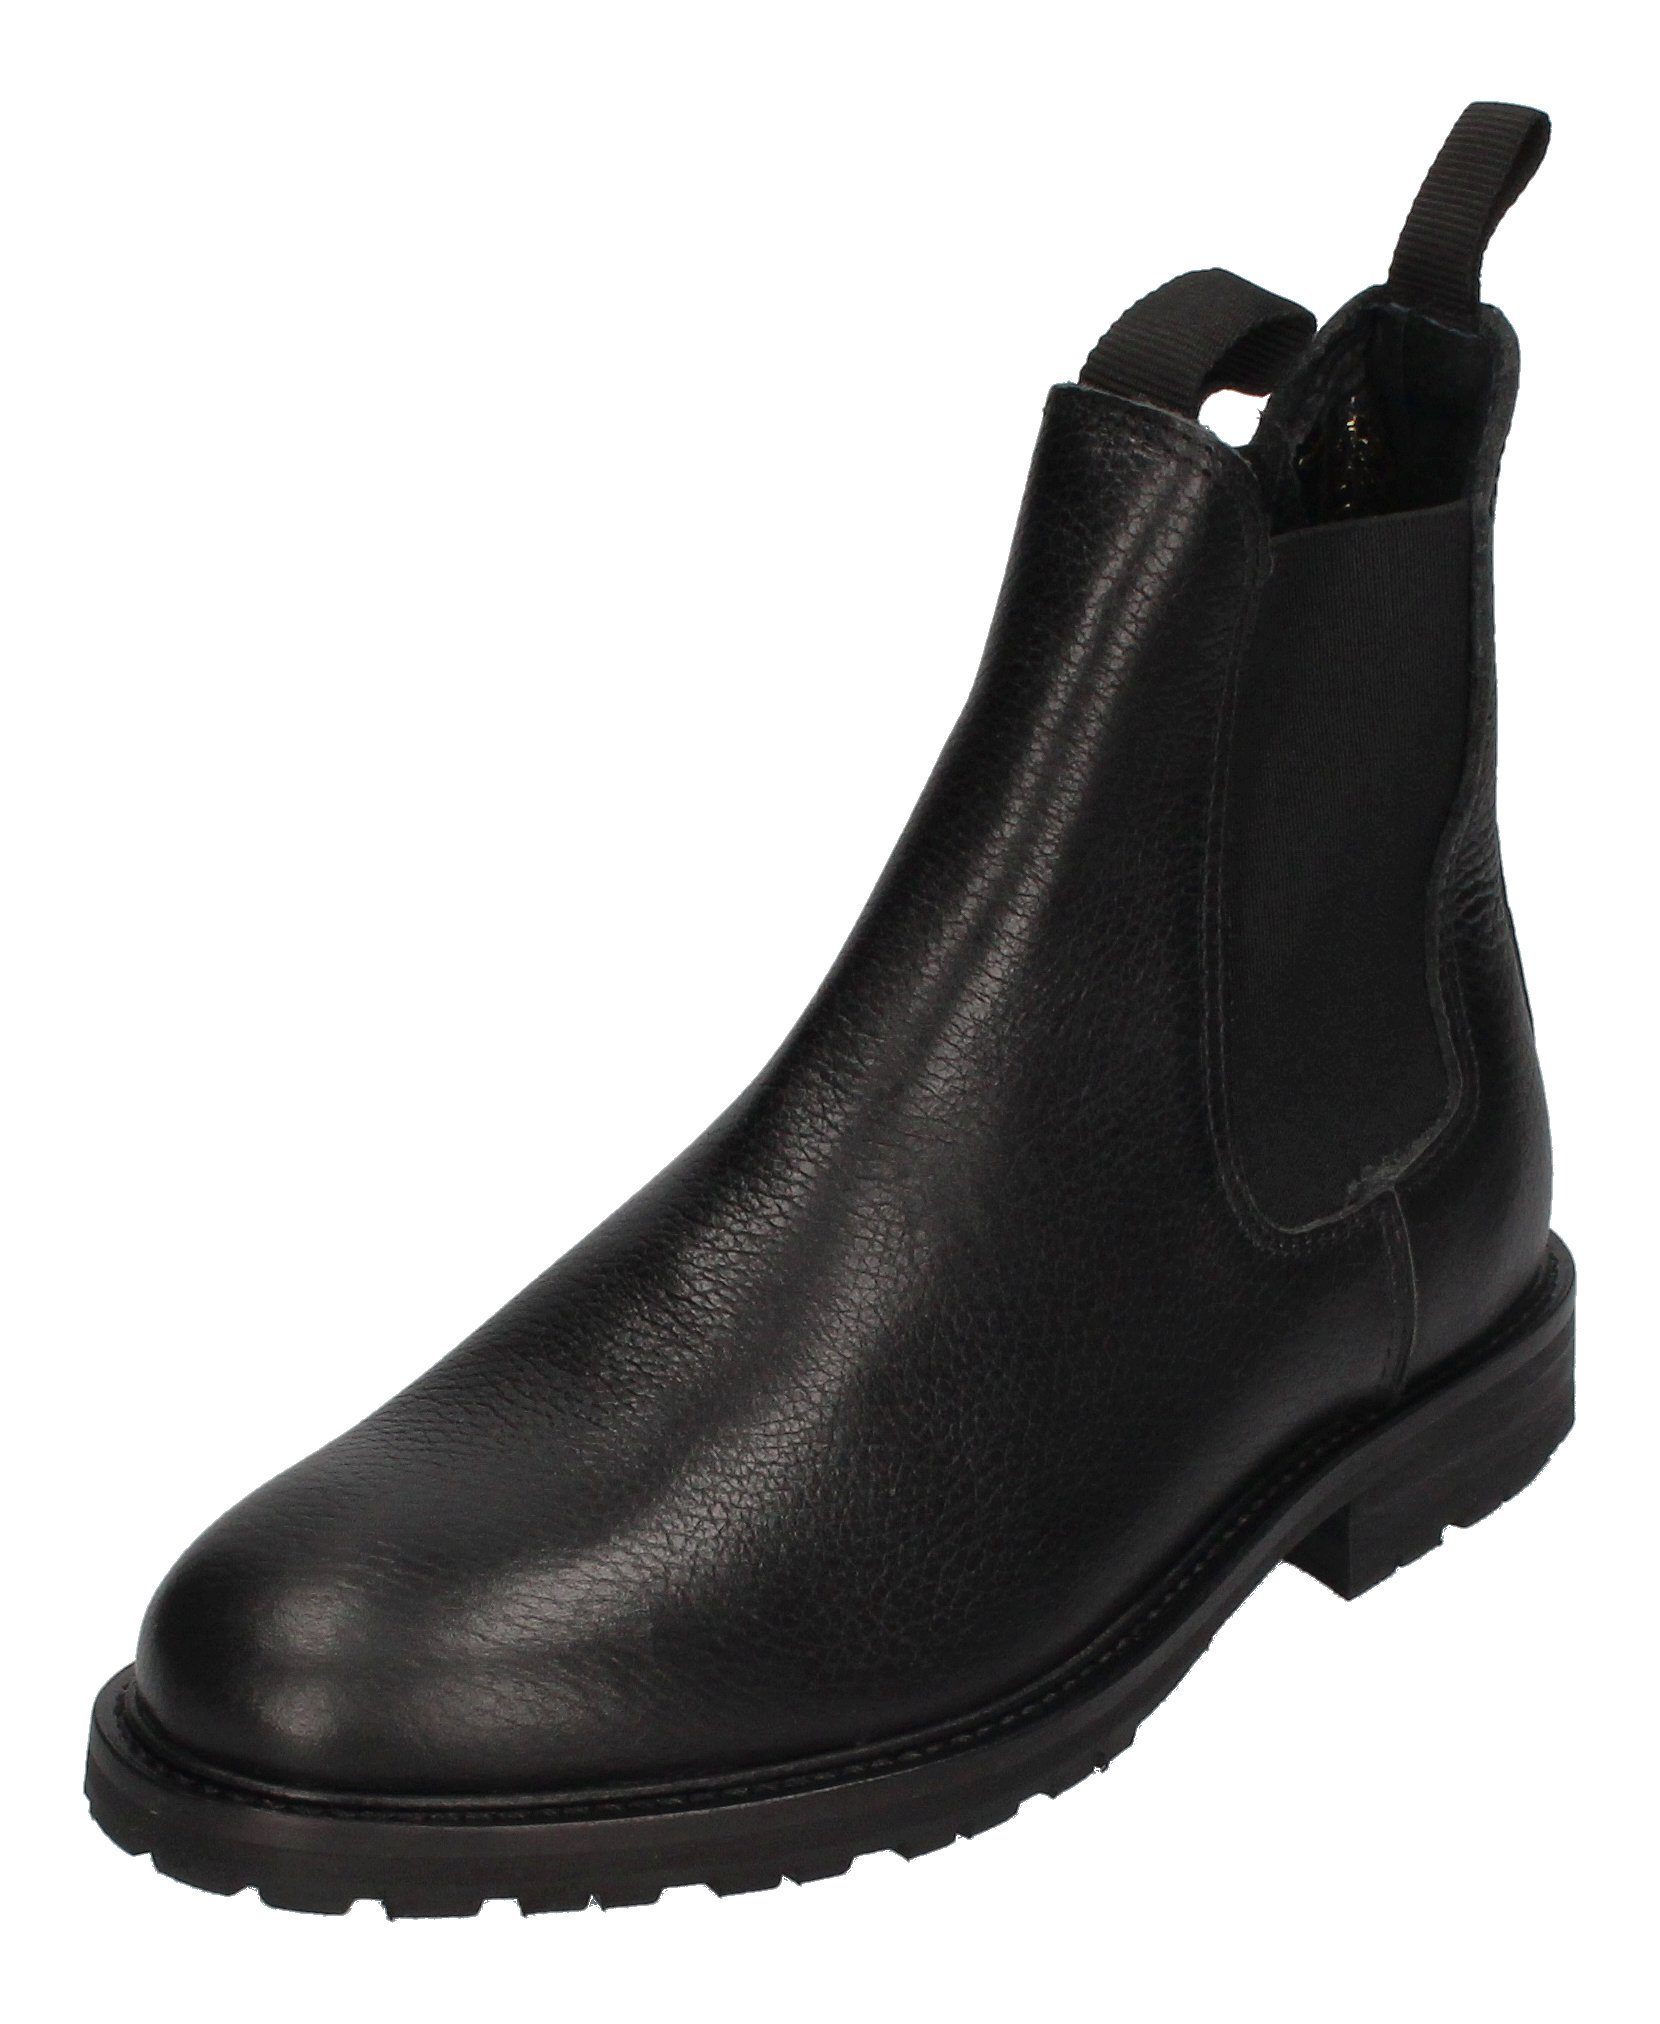 AVERY STB2028 BEAR Black L THE SHOE Chelseaboots